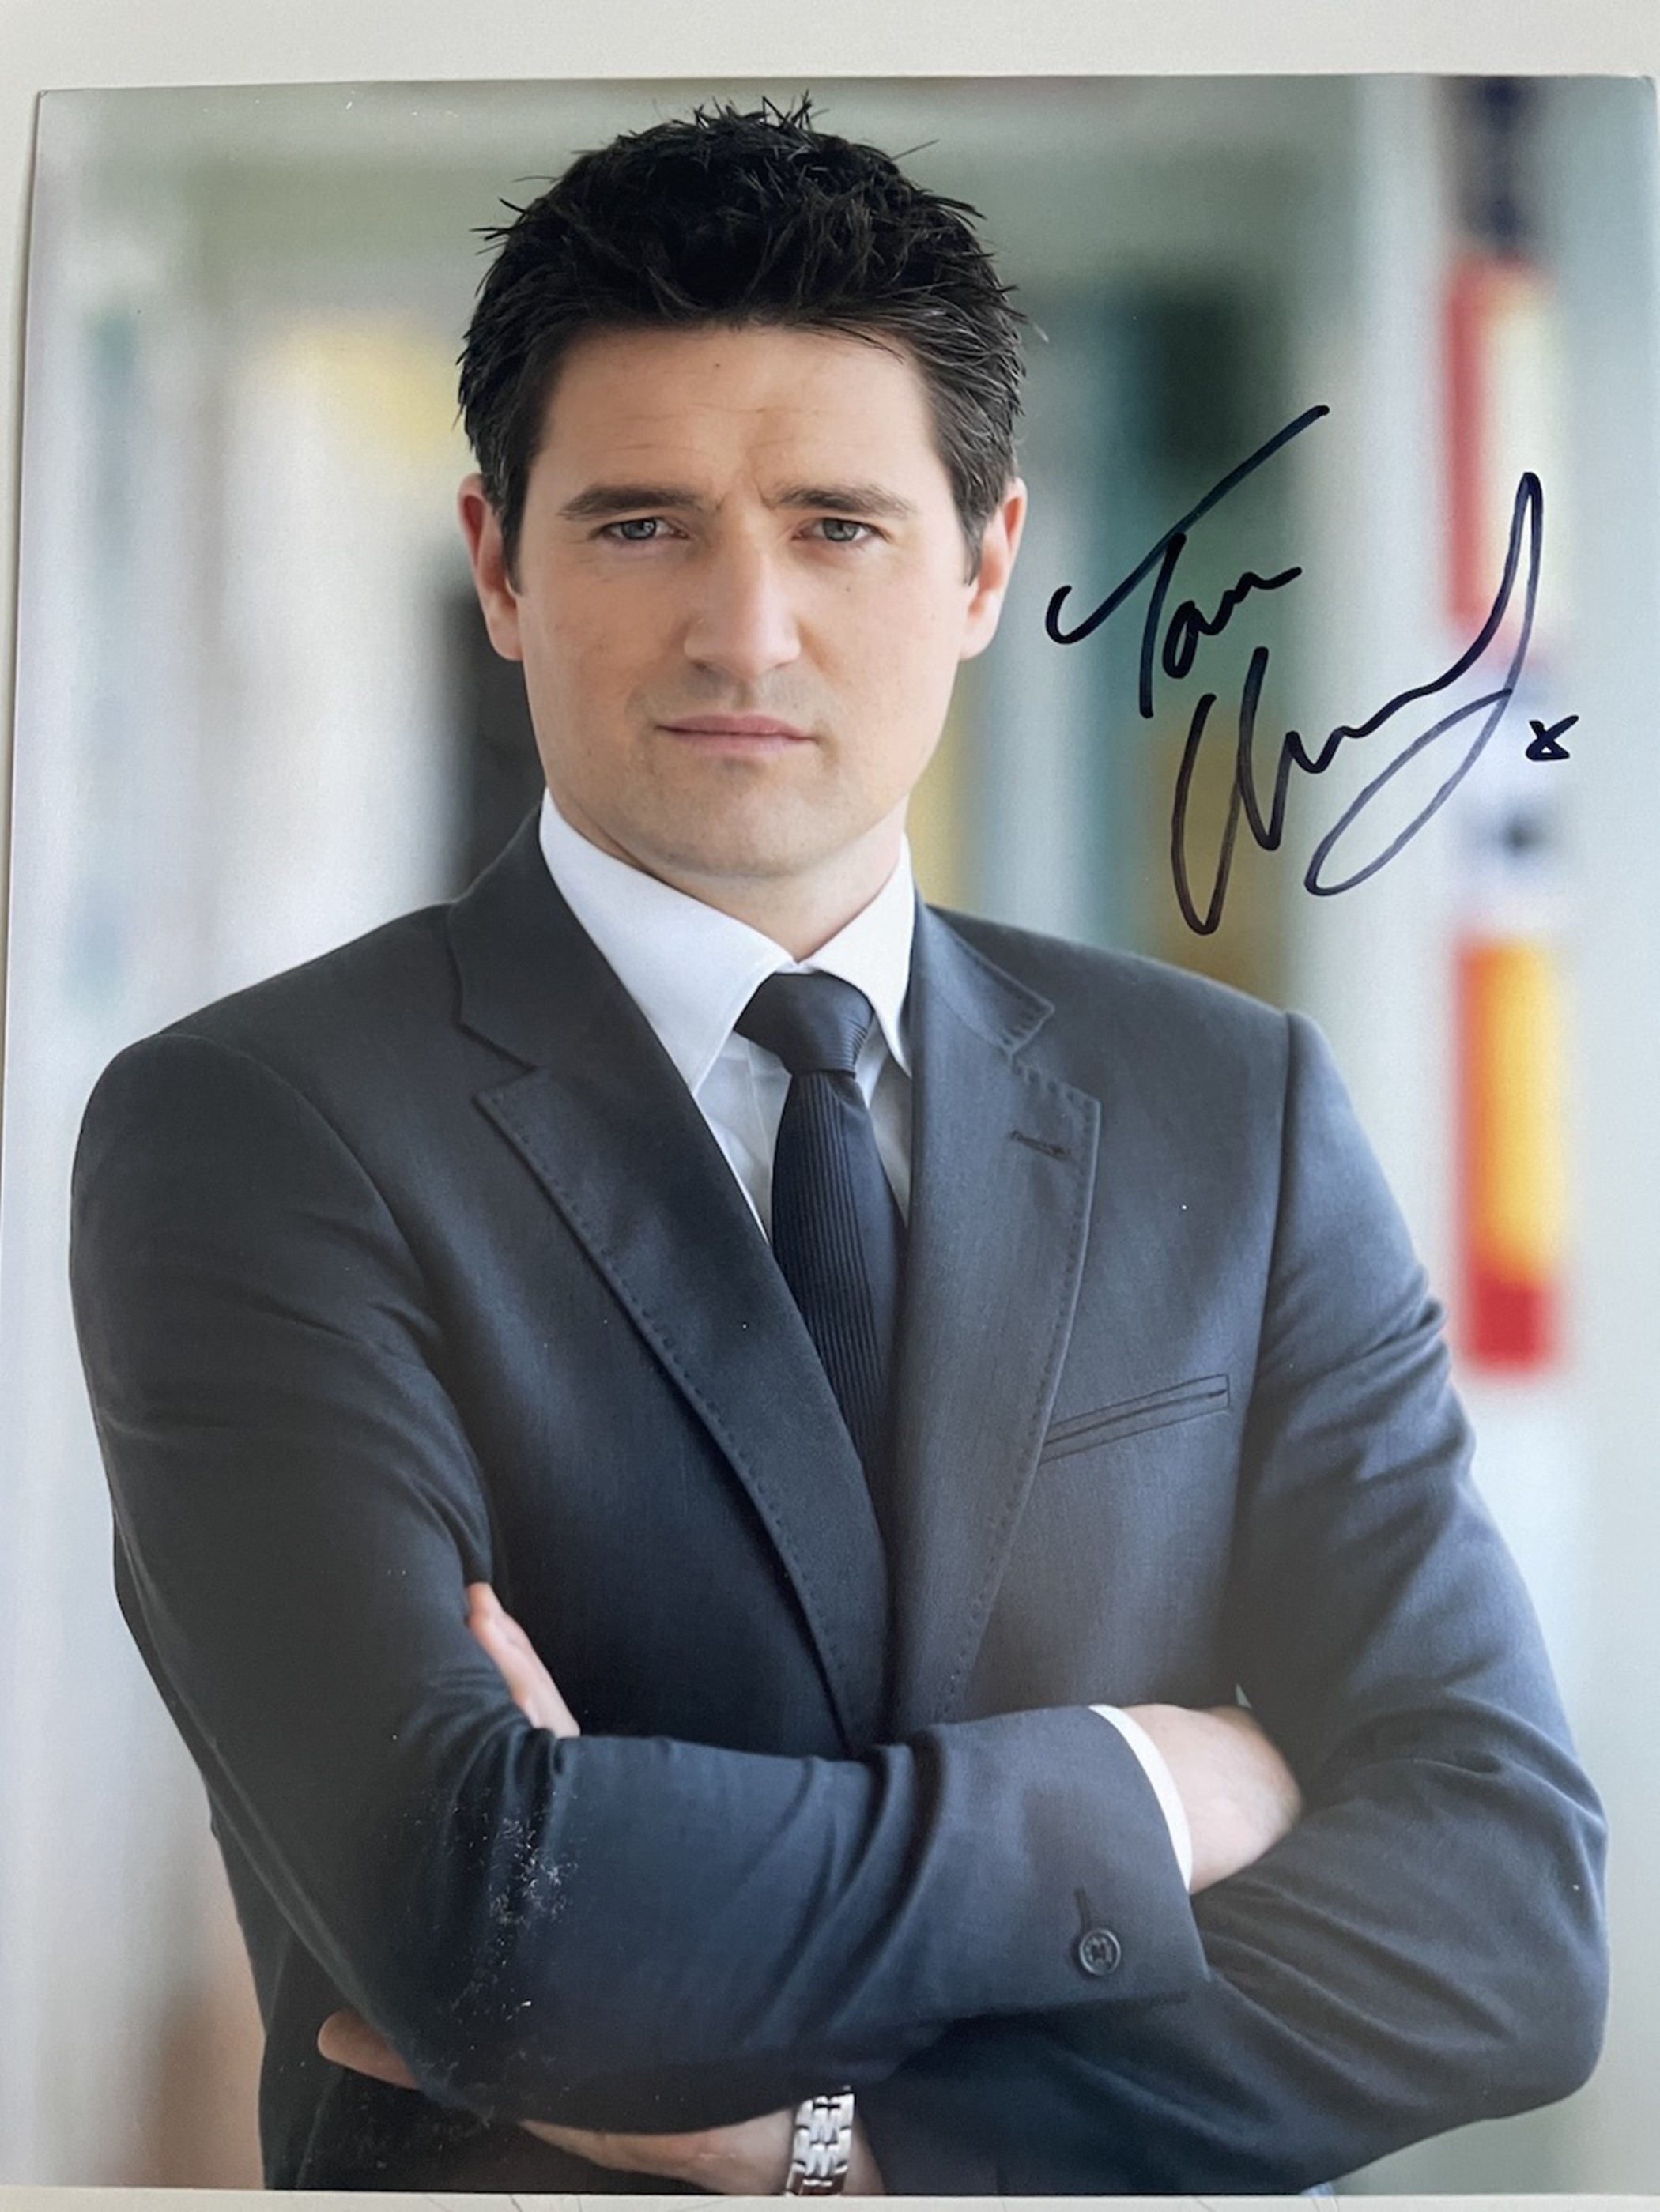 Tom Chambers Popular British Actor Signed 10x8 inch Photo. Good condition. All autographs are